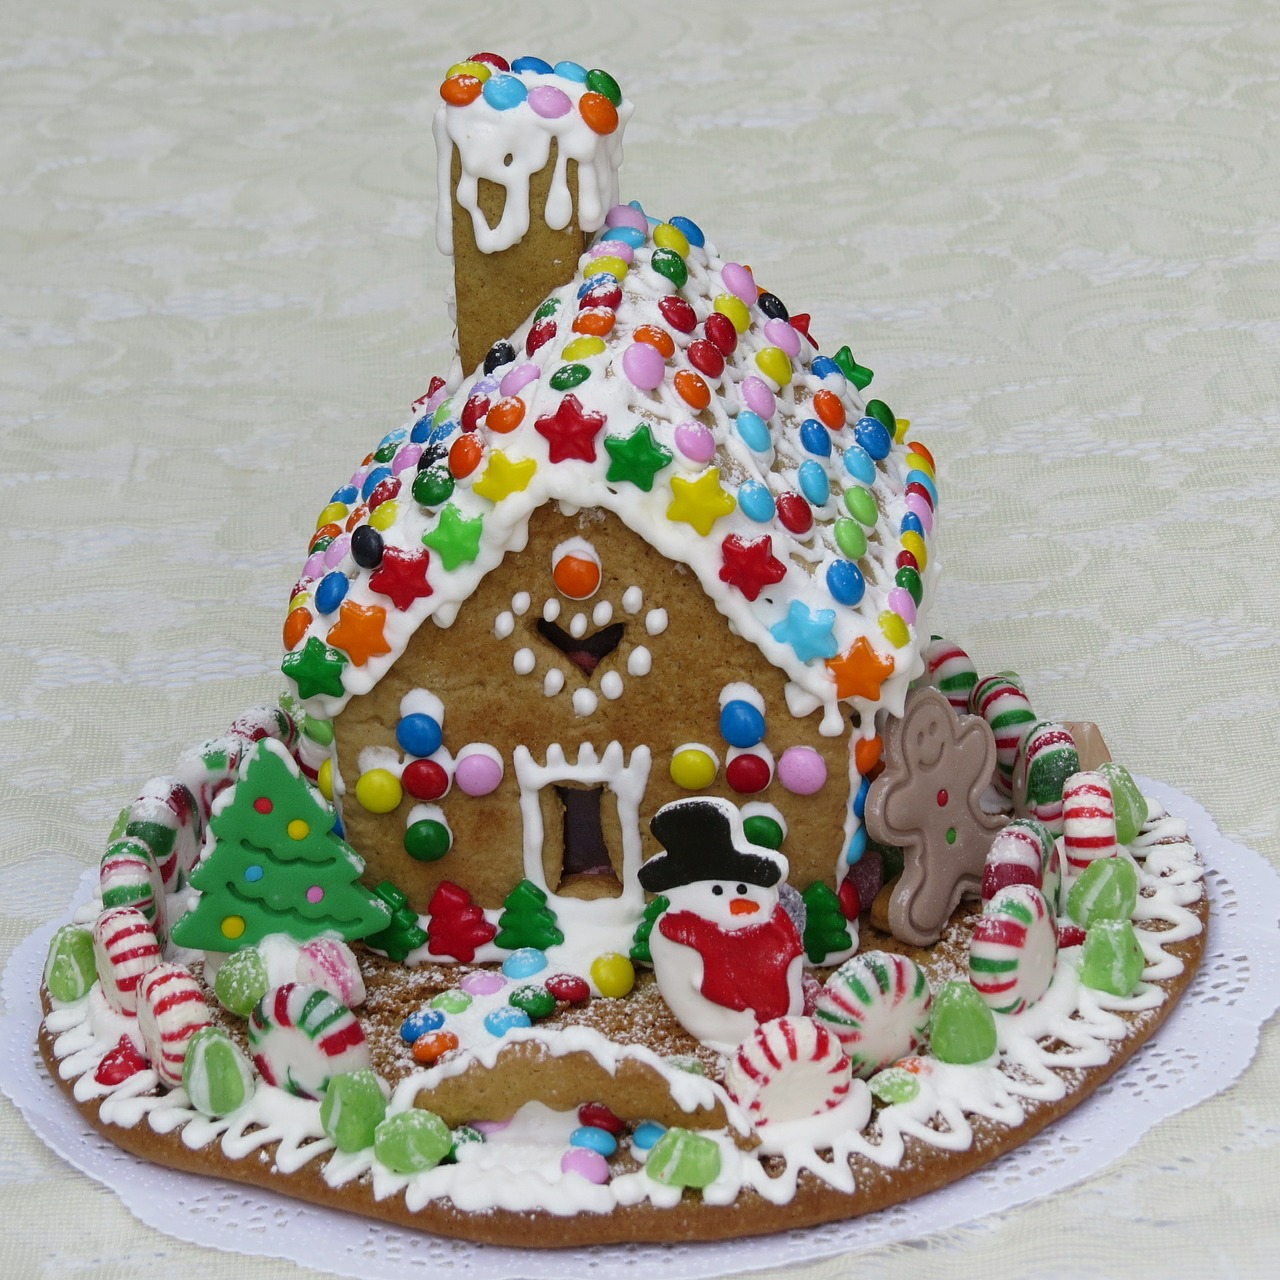 gingerbread house pastry decoration free photo